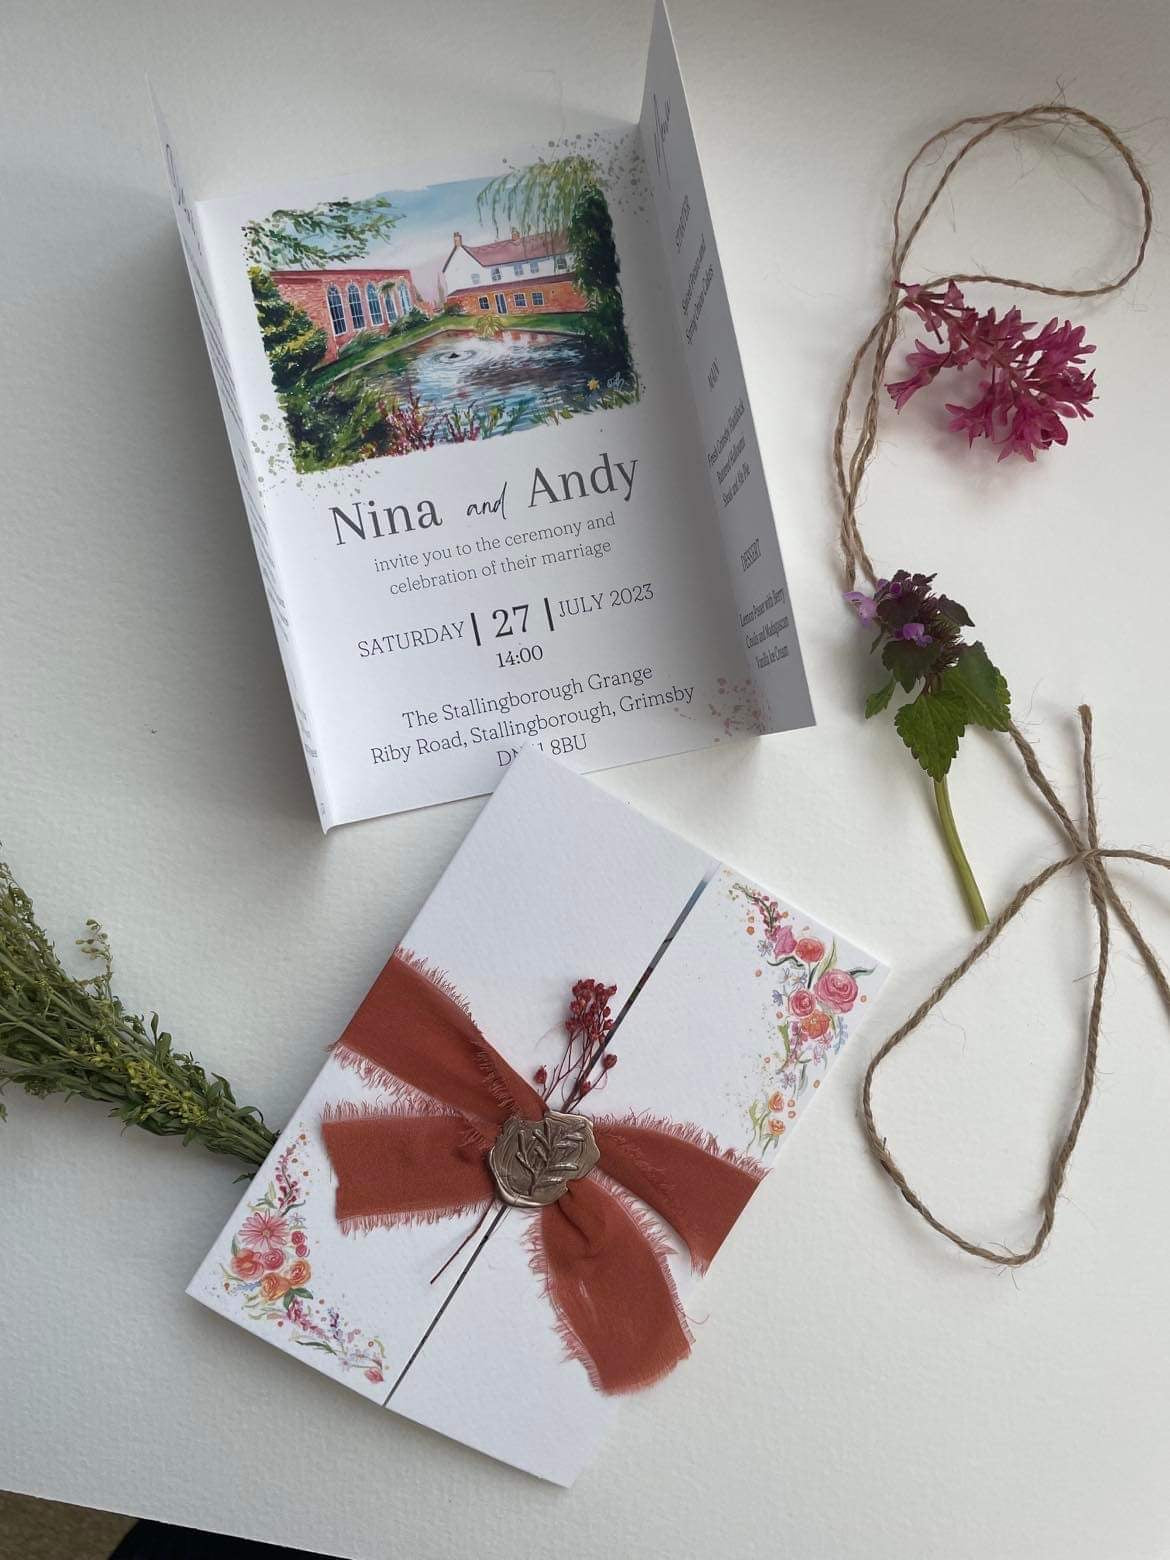 Luxury gatefold invitations designed by Eve Leoni Art, featuring a watercolour illustration of Stallingborough Grange and embellished with silk ribbon and a wax seal.